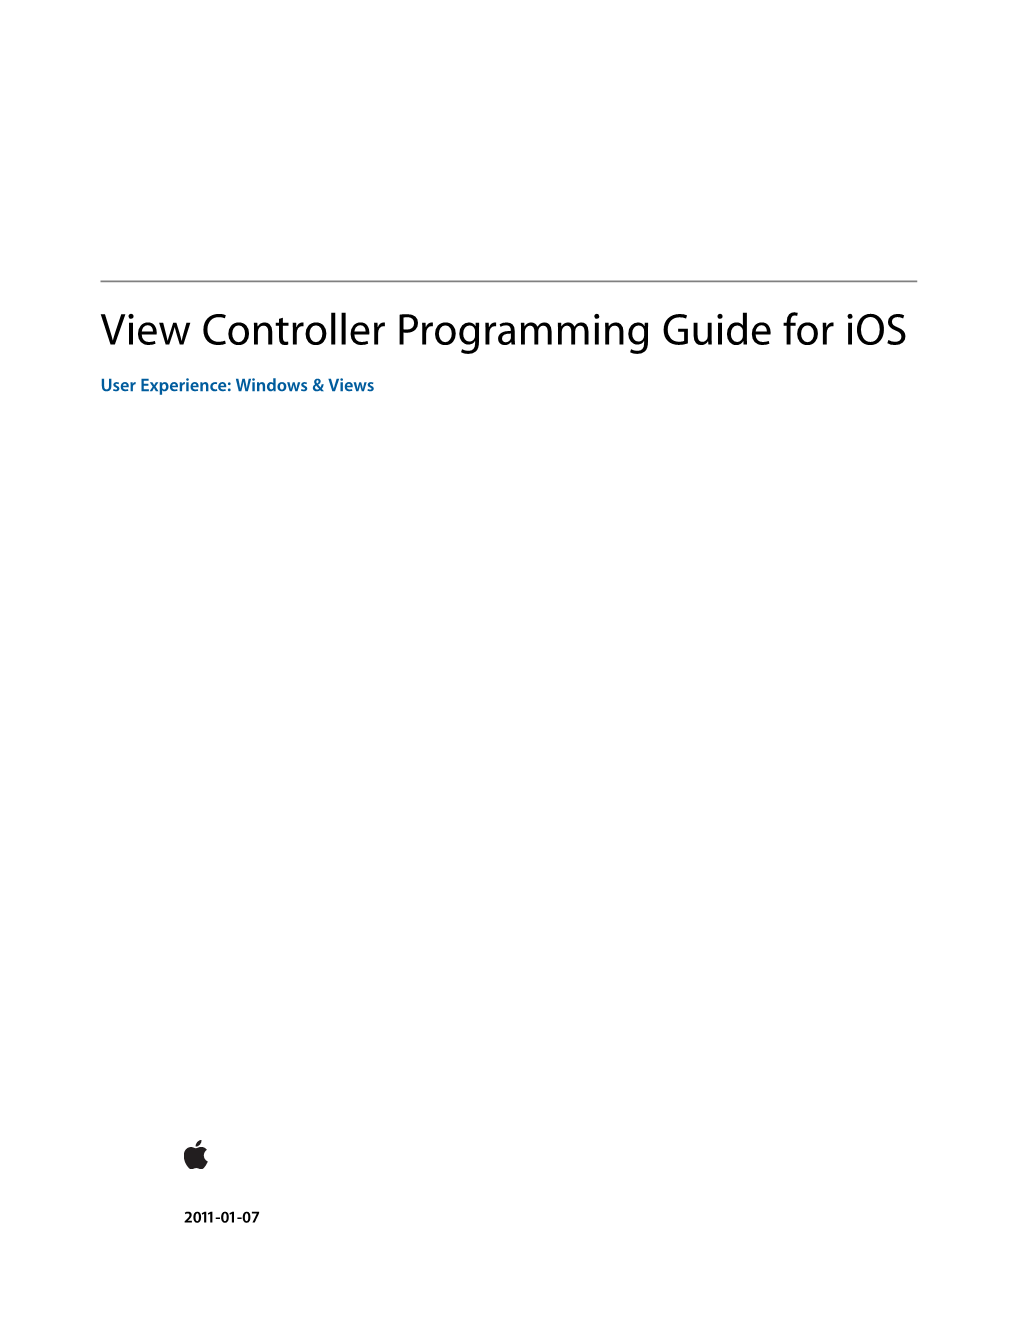 View Controller Programming Guide for Ios